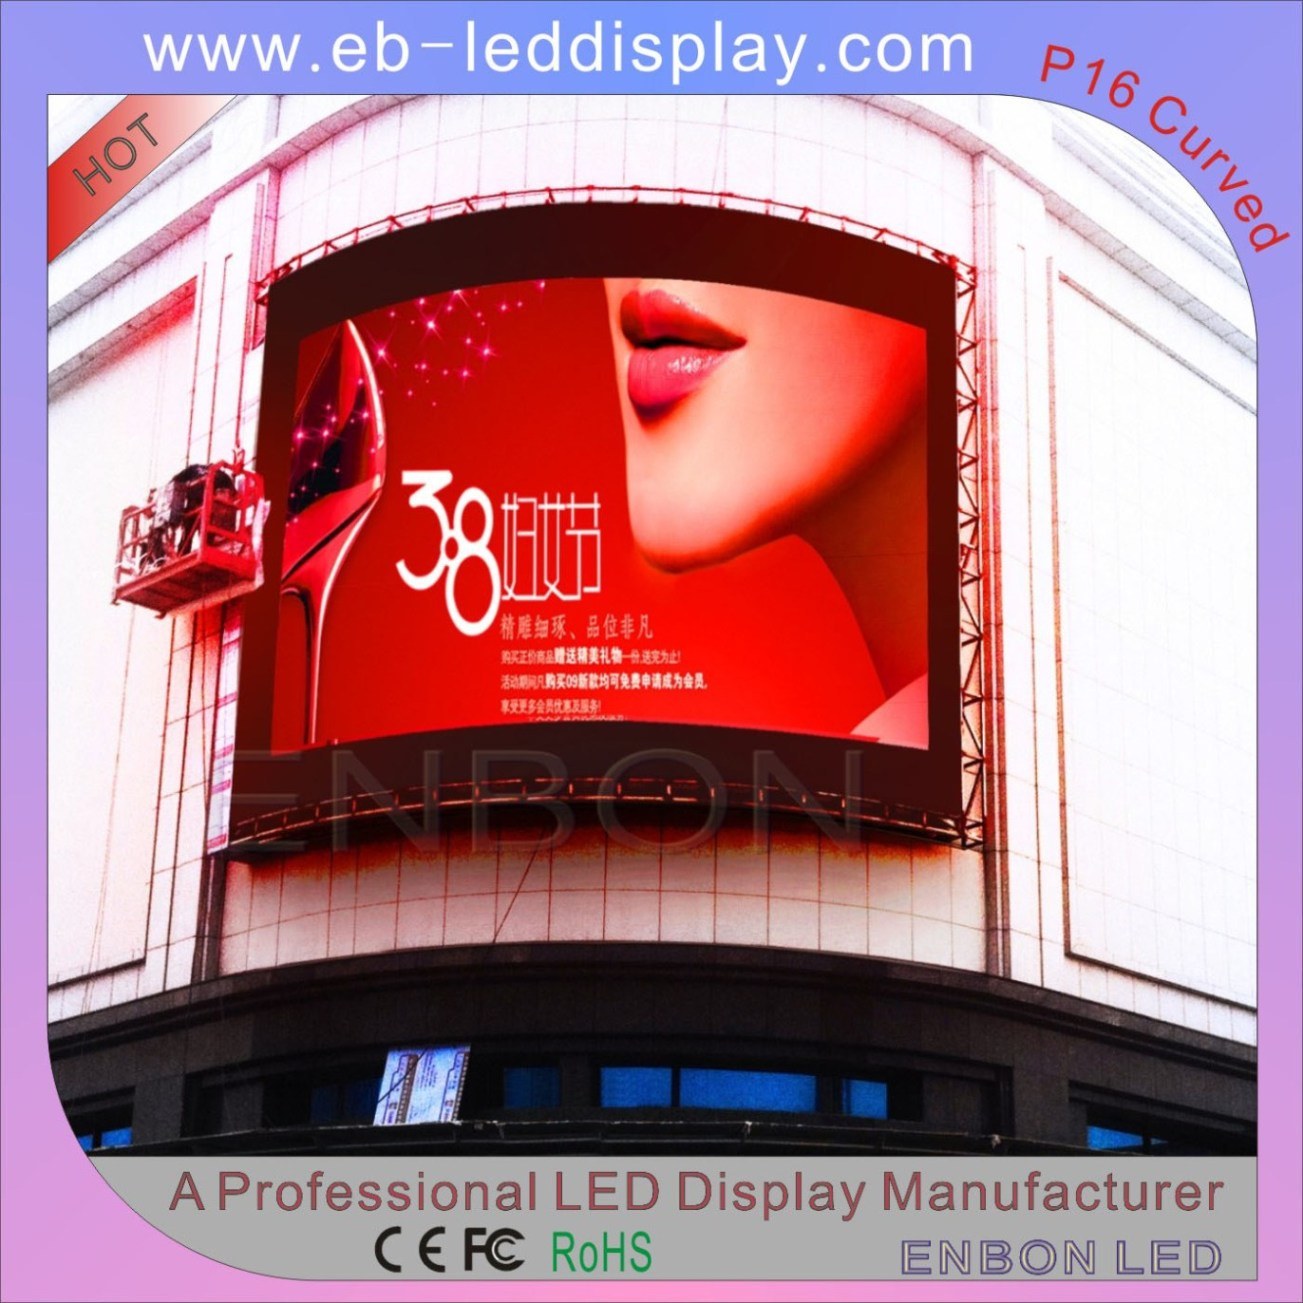 High Quality Full Color LED Billboard / Outdoor Advertising LED Display (4X3m, 6X4m, 8X5m board P6 P8 P10 P16)